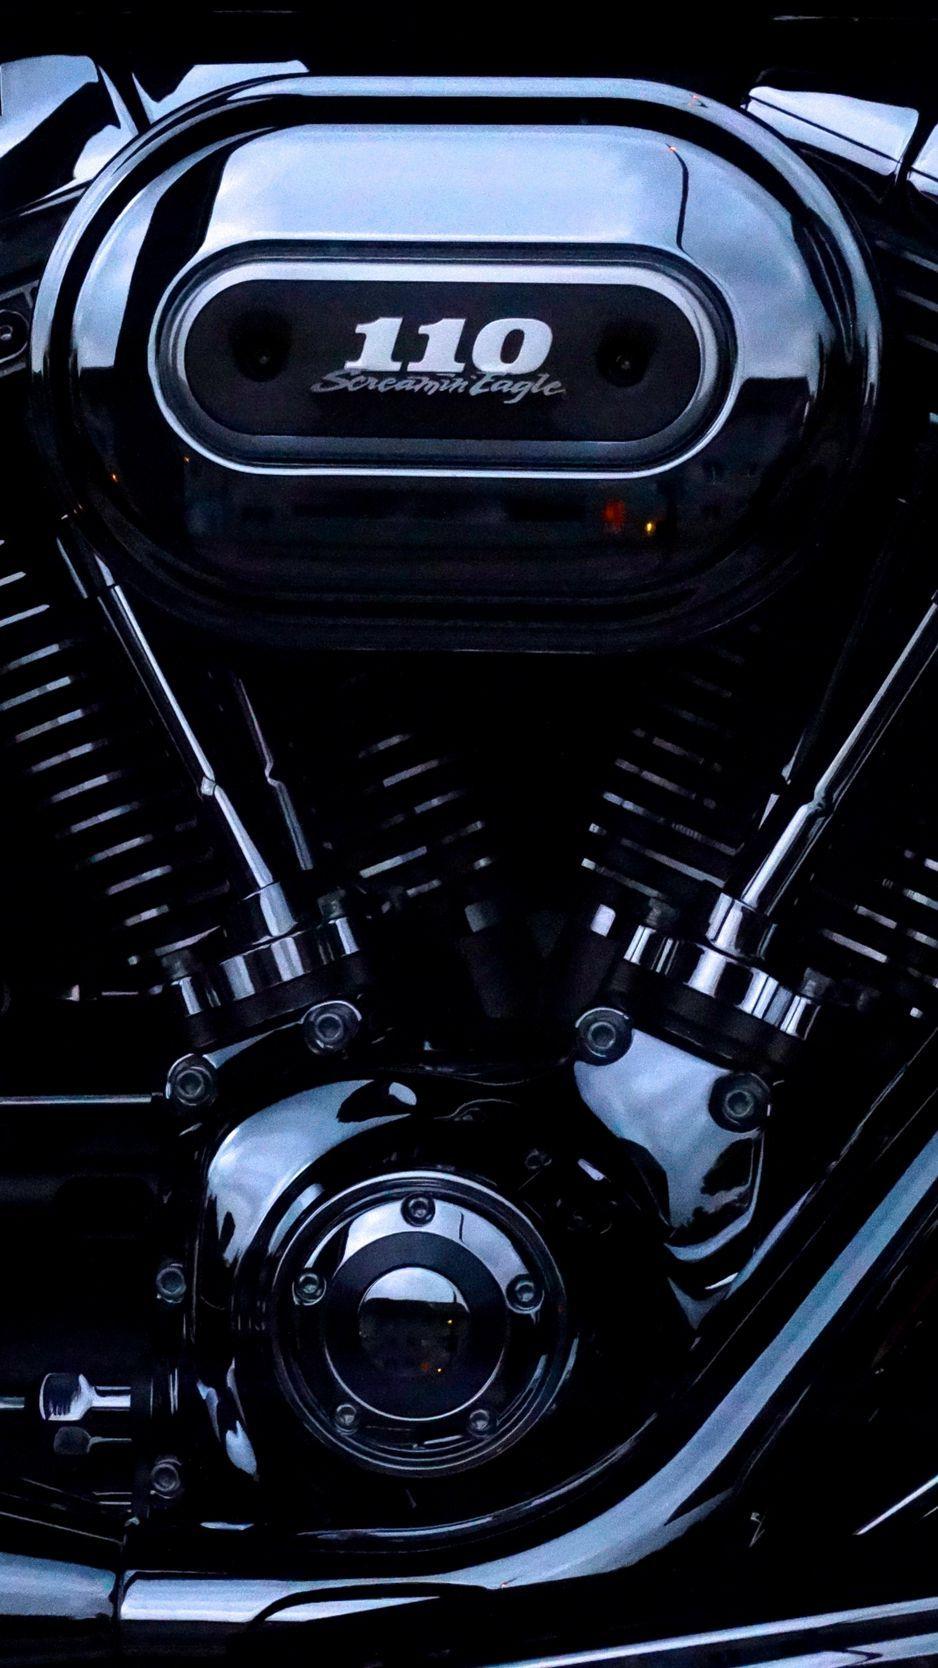 Engine iPhone Wallpapers - Top Free Engine iPhone Backgrounds